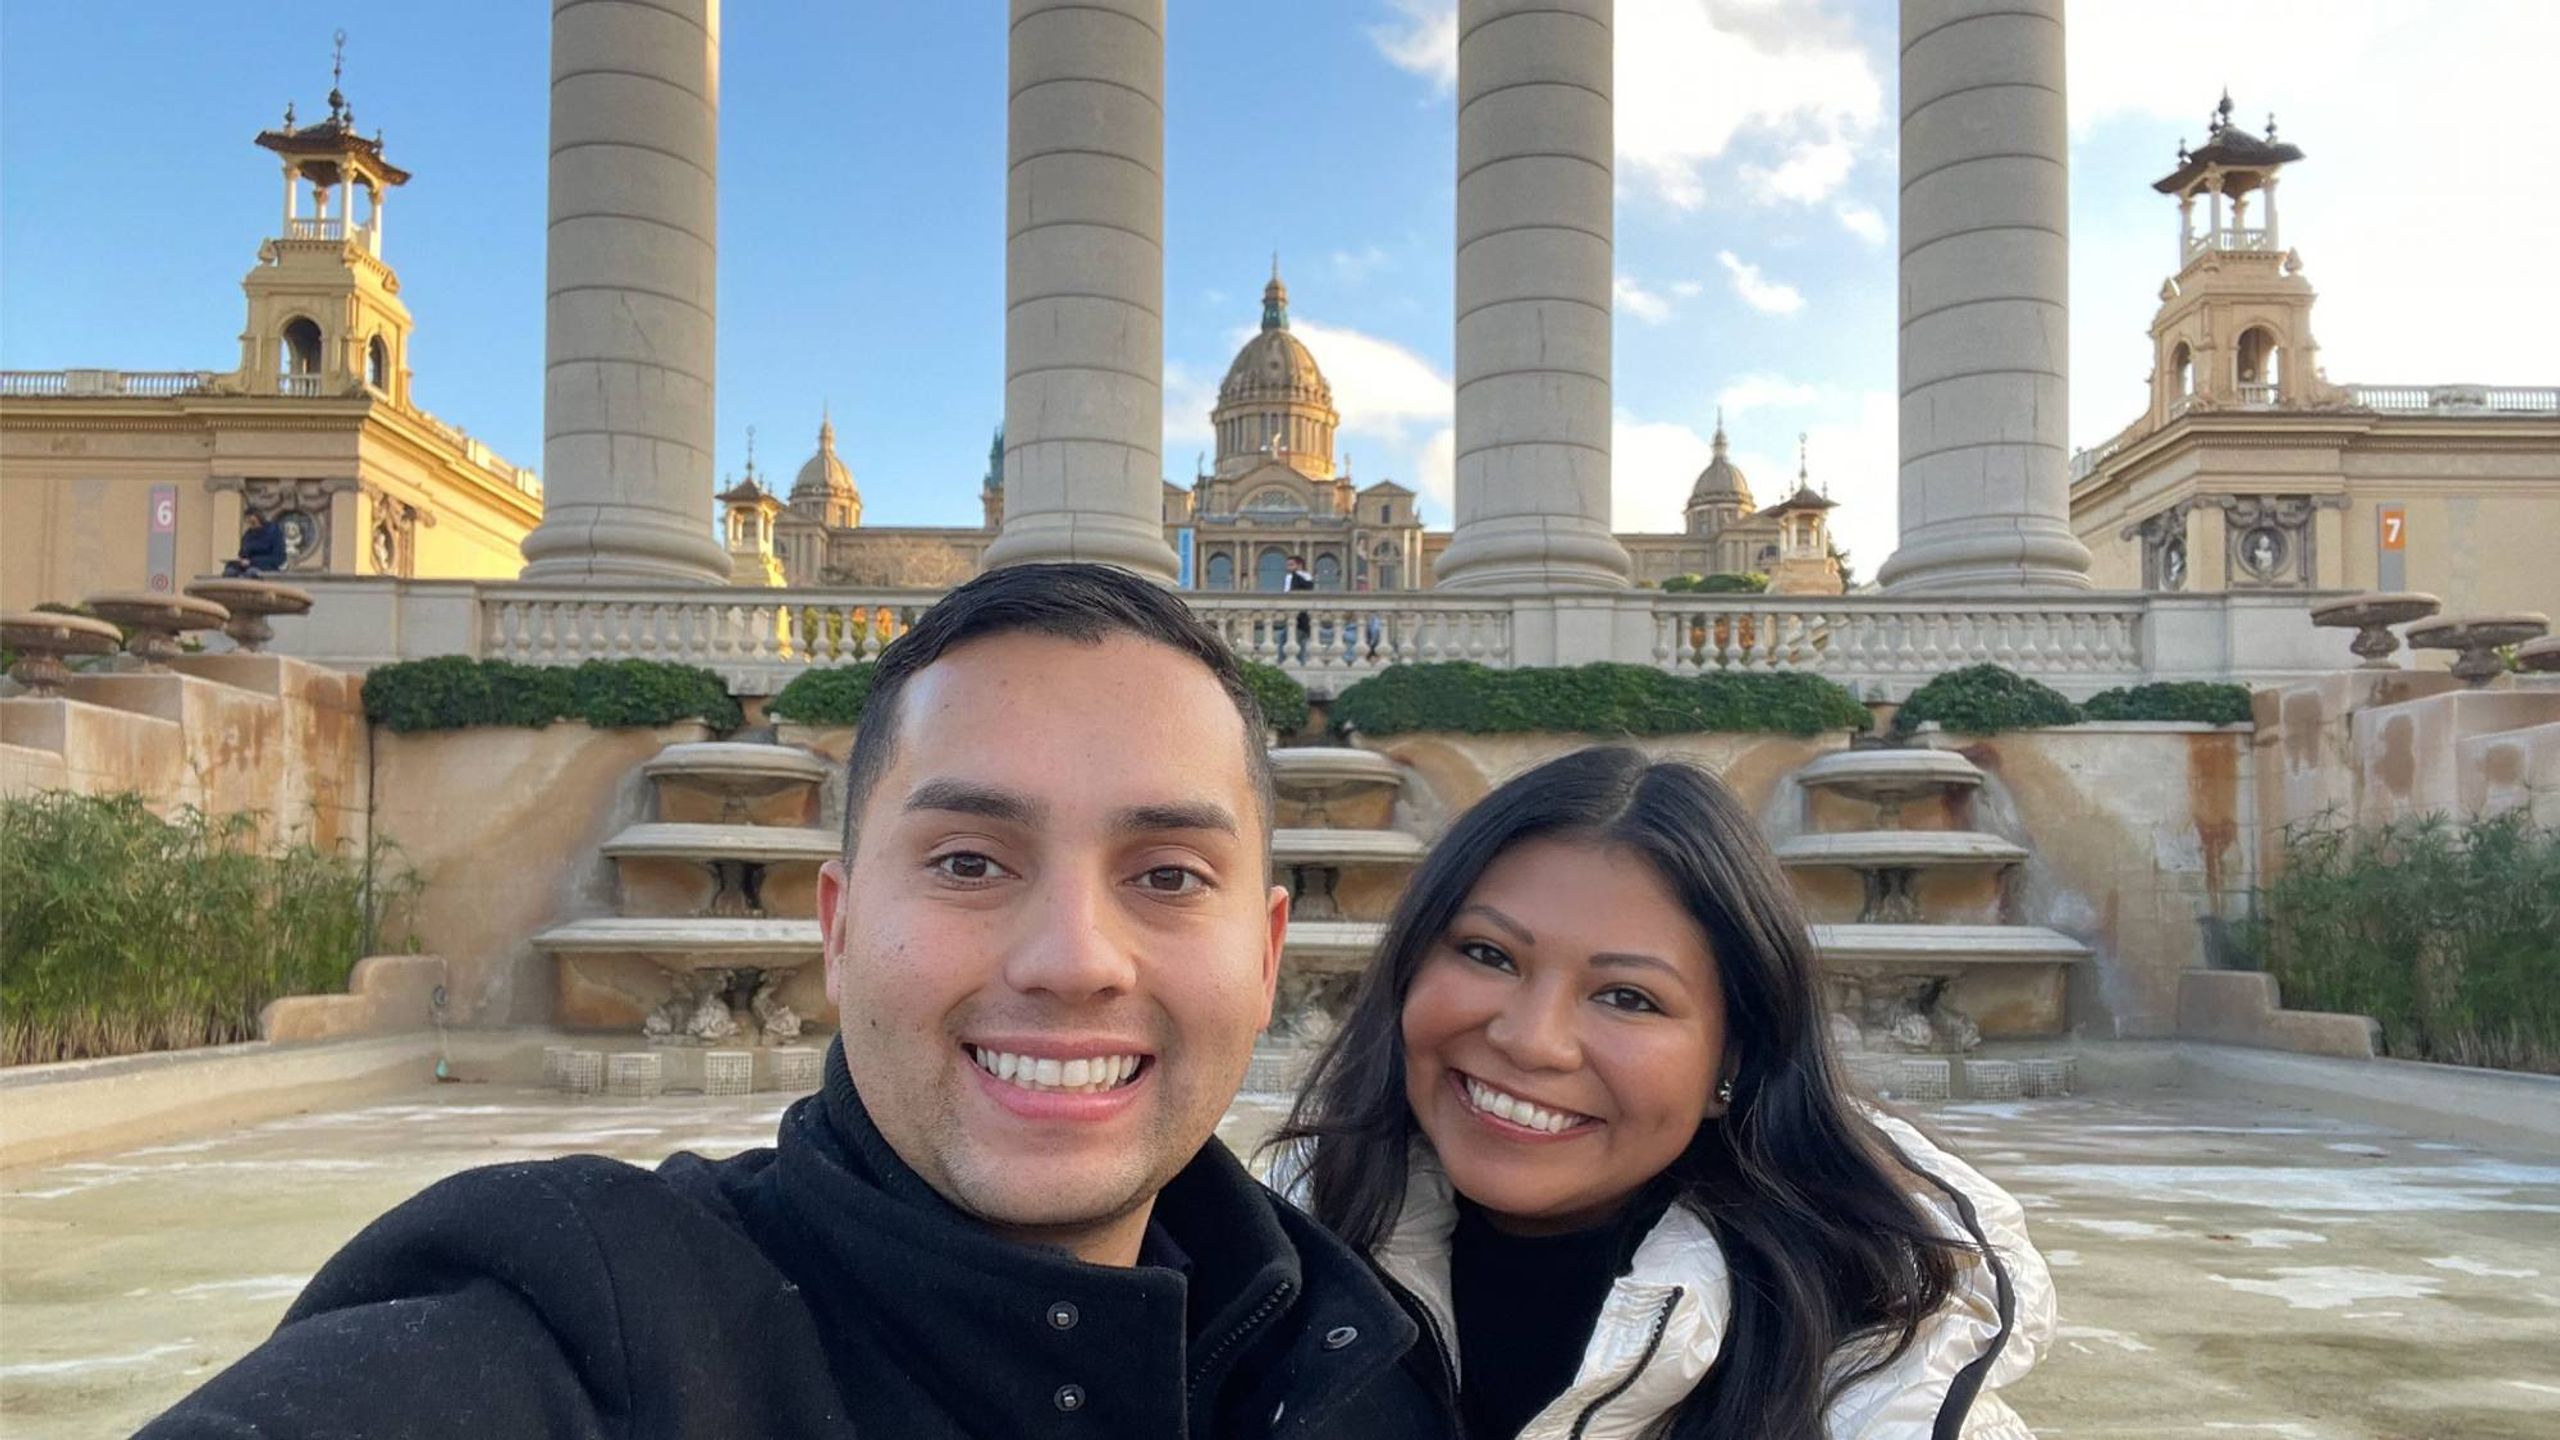 Two people smiling in front of ornate buildings. Next Avenue